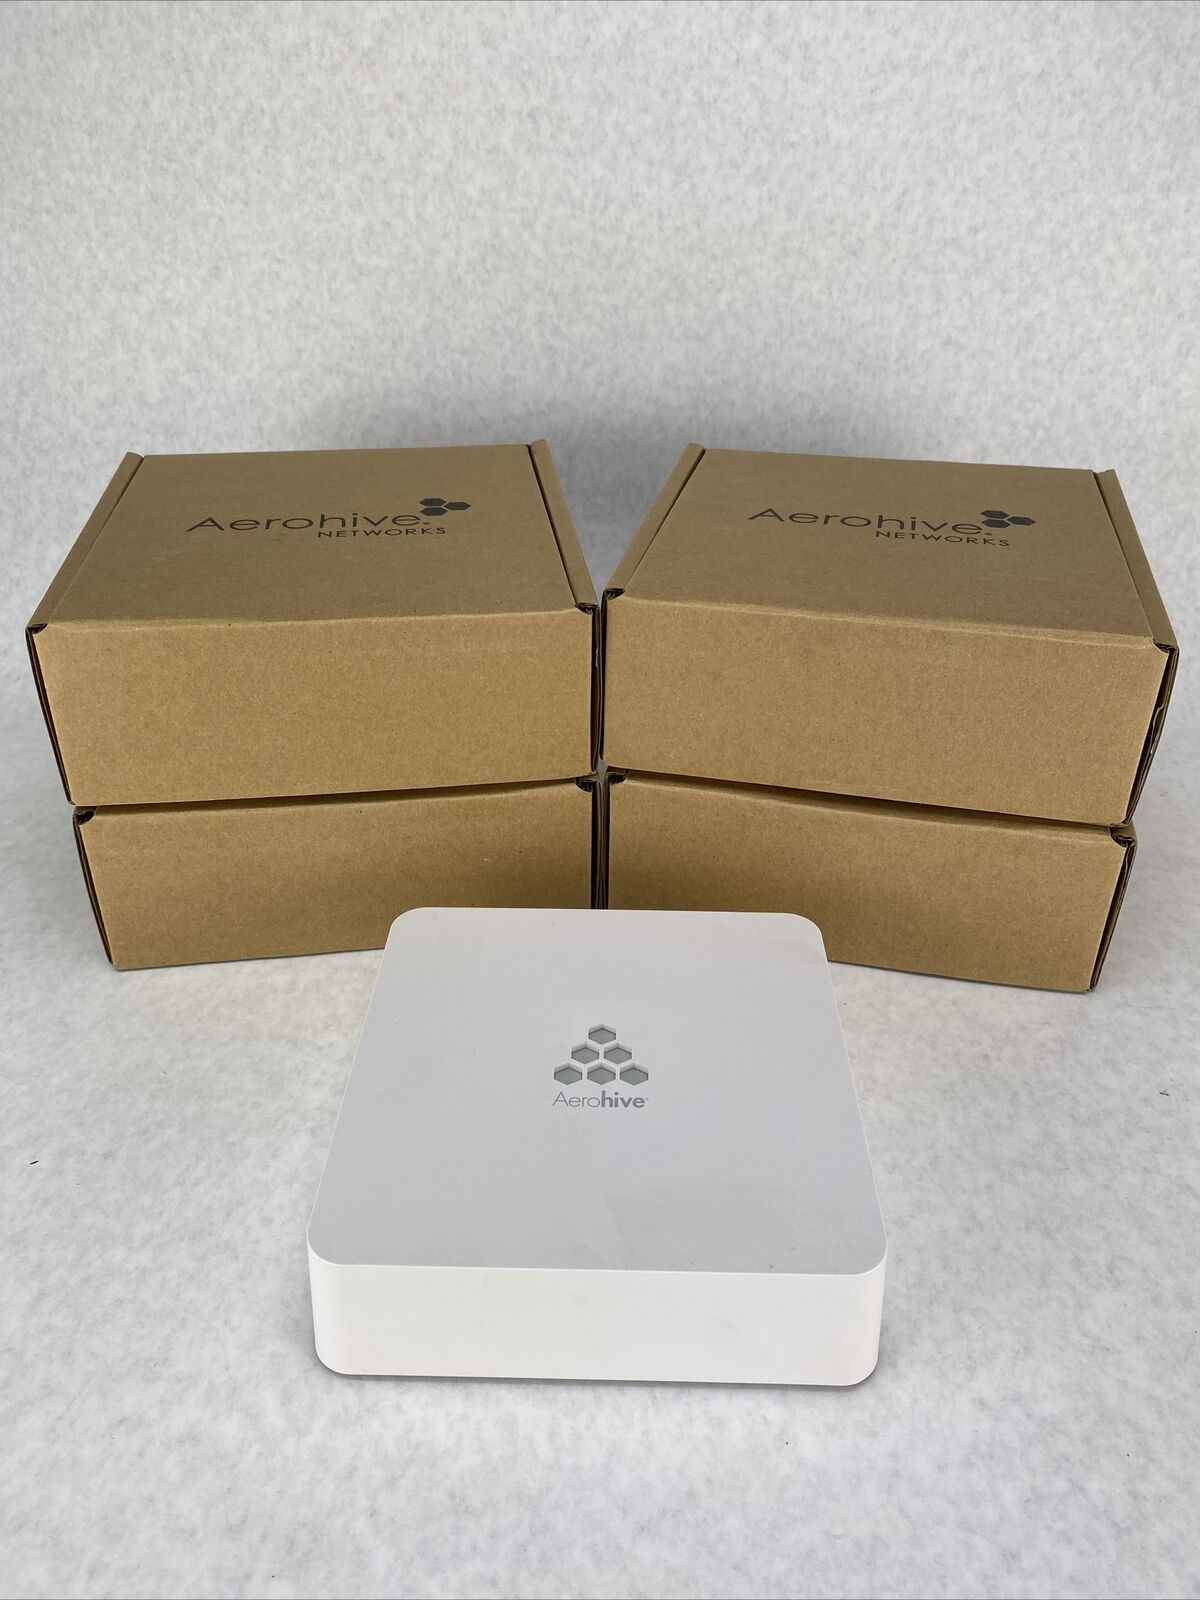 Lot of 5 Aerohive HiveAP 120 Wireless Access Point WiFi 802.11n PoE Dual Band